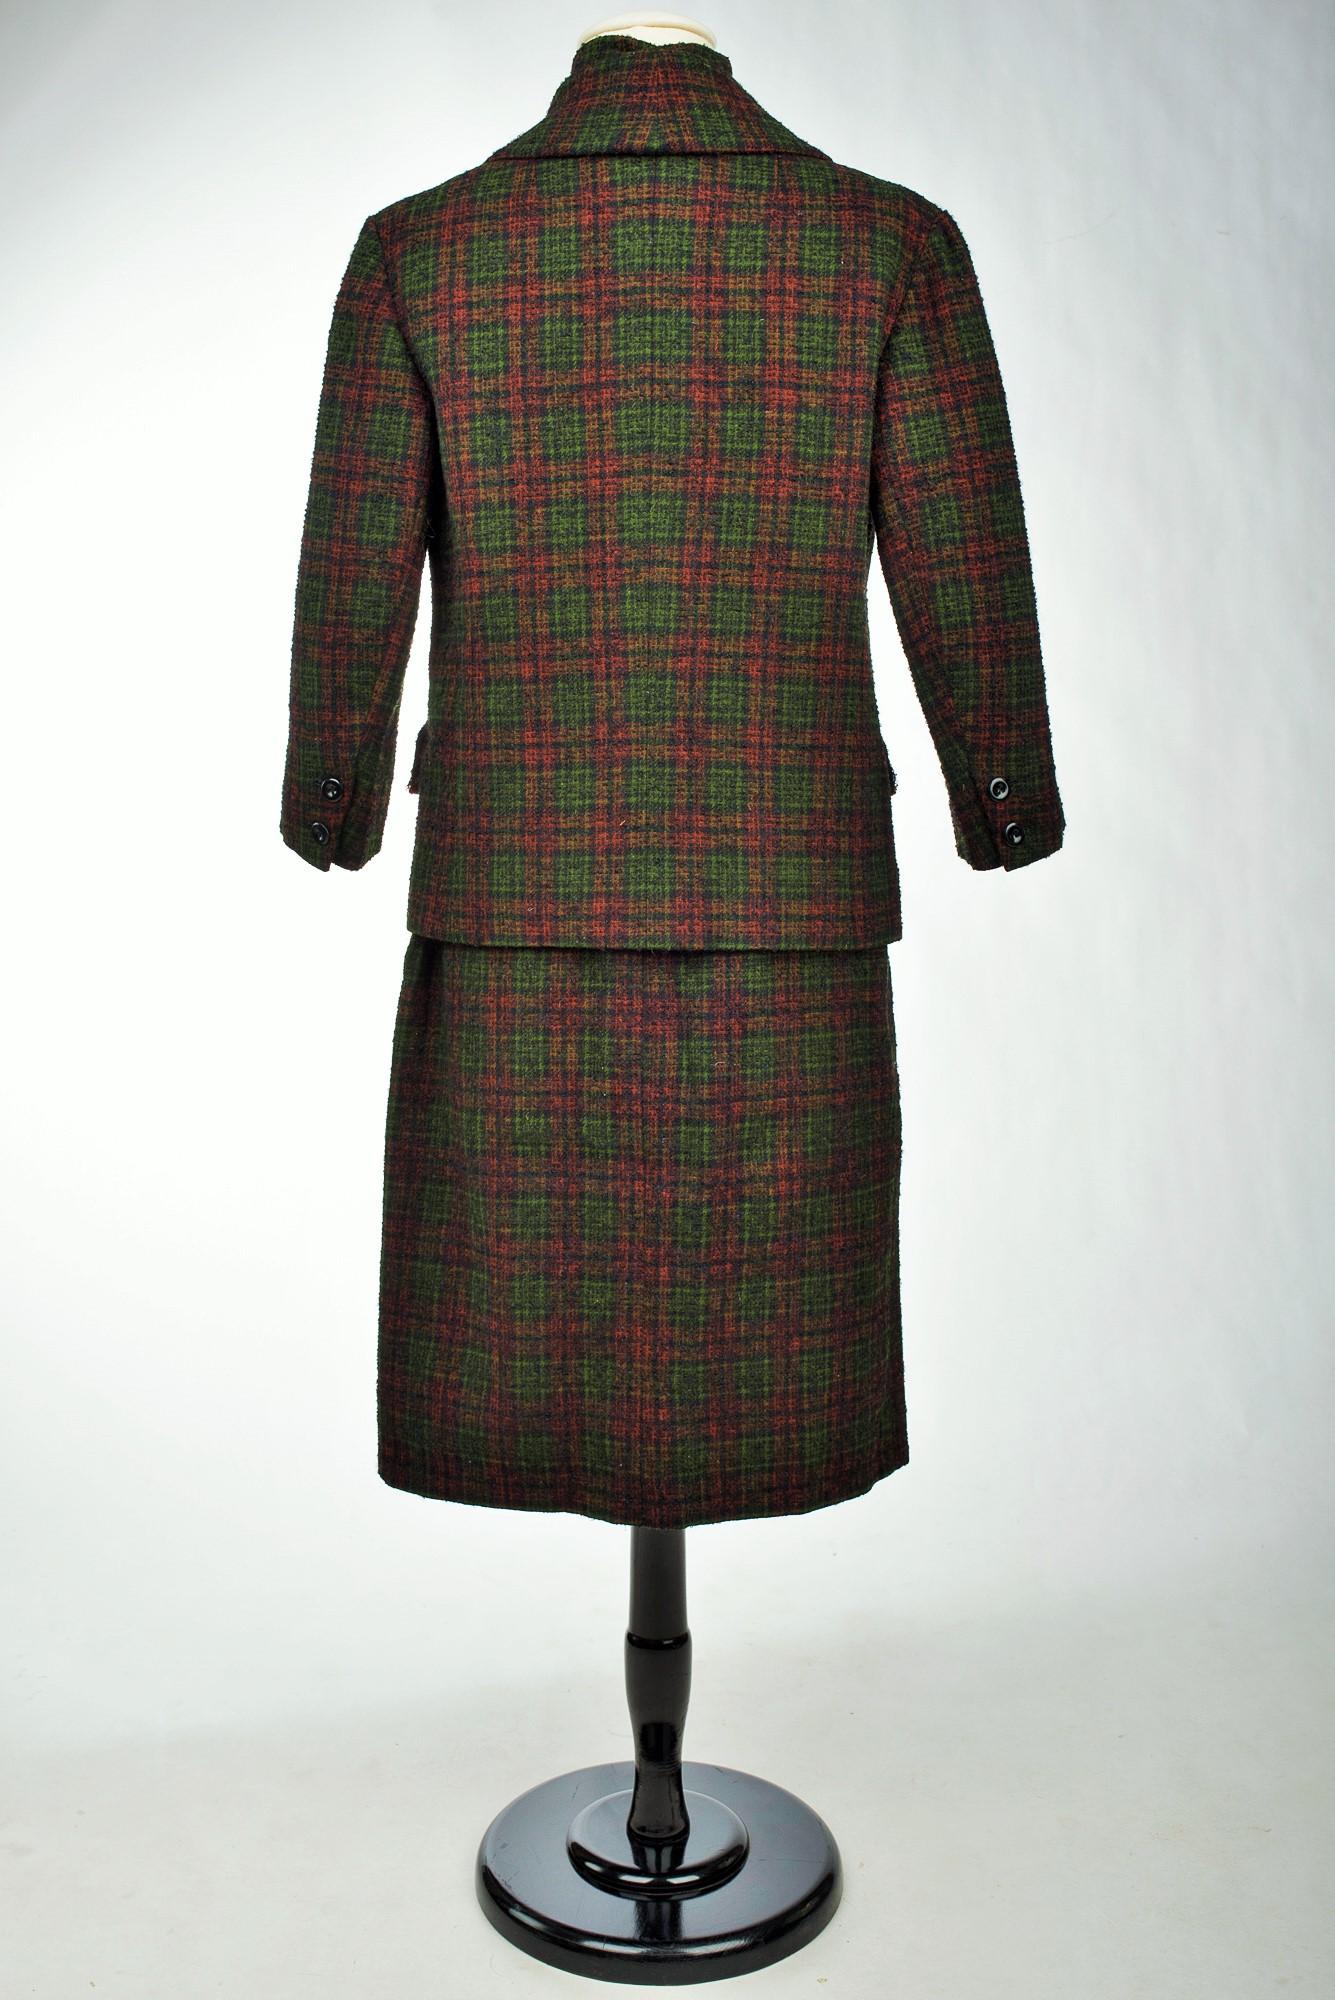 A French Dior/Bérénice Demi Couture skirt suit Wool Tartan, French Circa 1970 For Sale 7